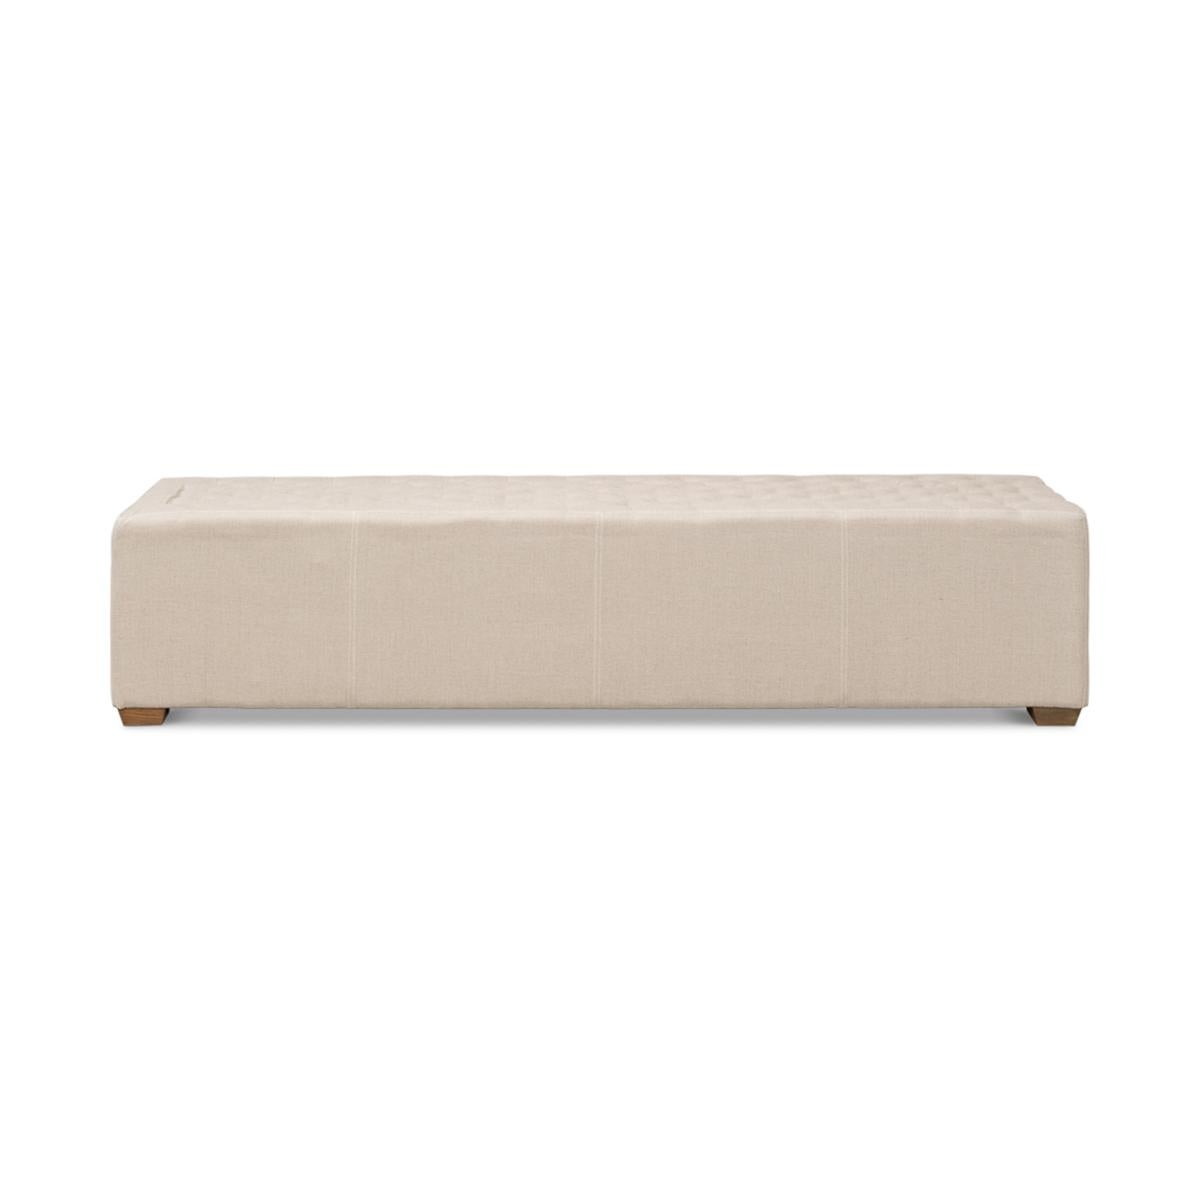 Modern tufted linen bench, the long tufted bench in natural beige linen, with American oak feet and brass traditional handle hardware.

Dimensions: 78